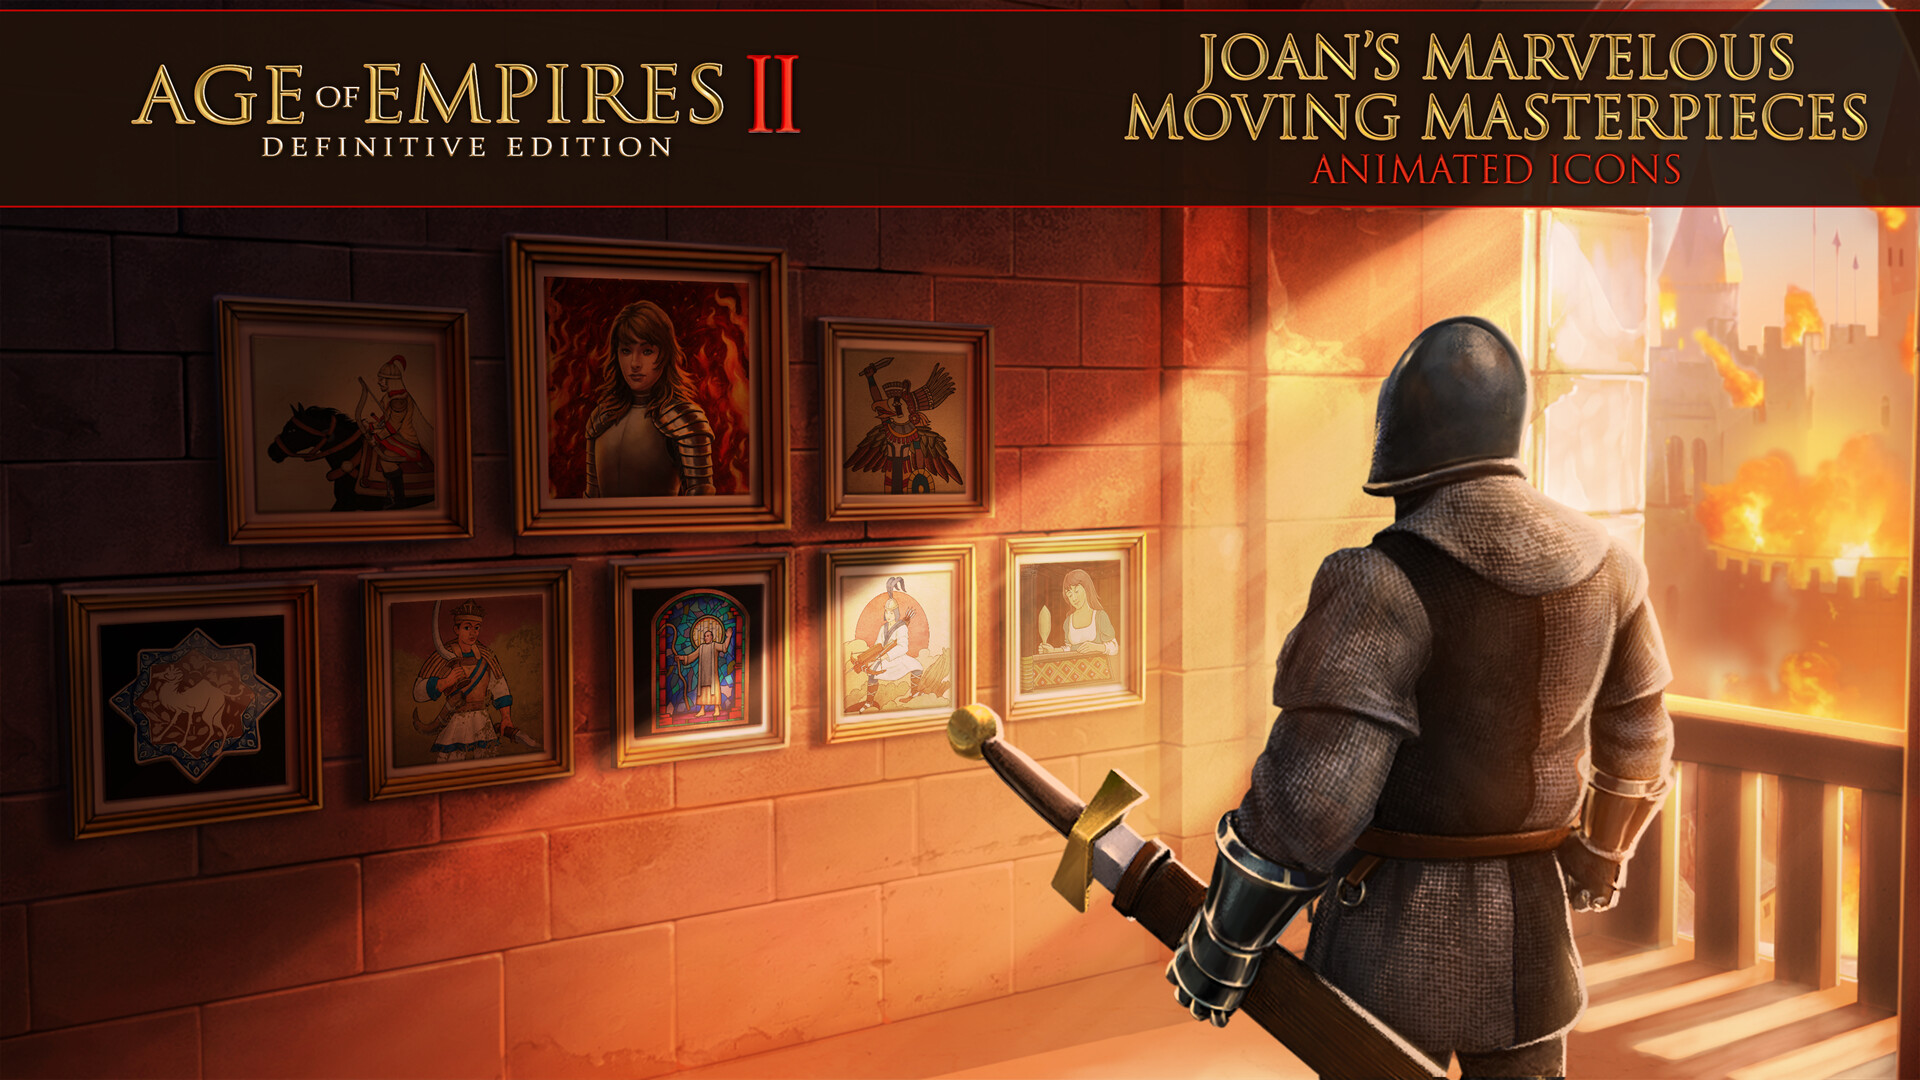 Age of Empires II: Definitive Edition – Joan’s Marvelous Moving Masterpieces Animated Icons Featured Screenshot #1